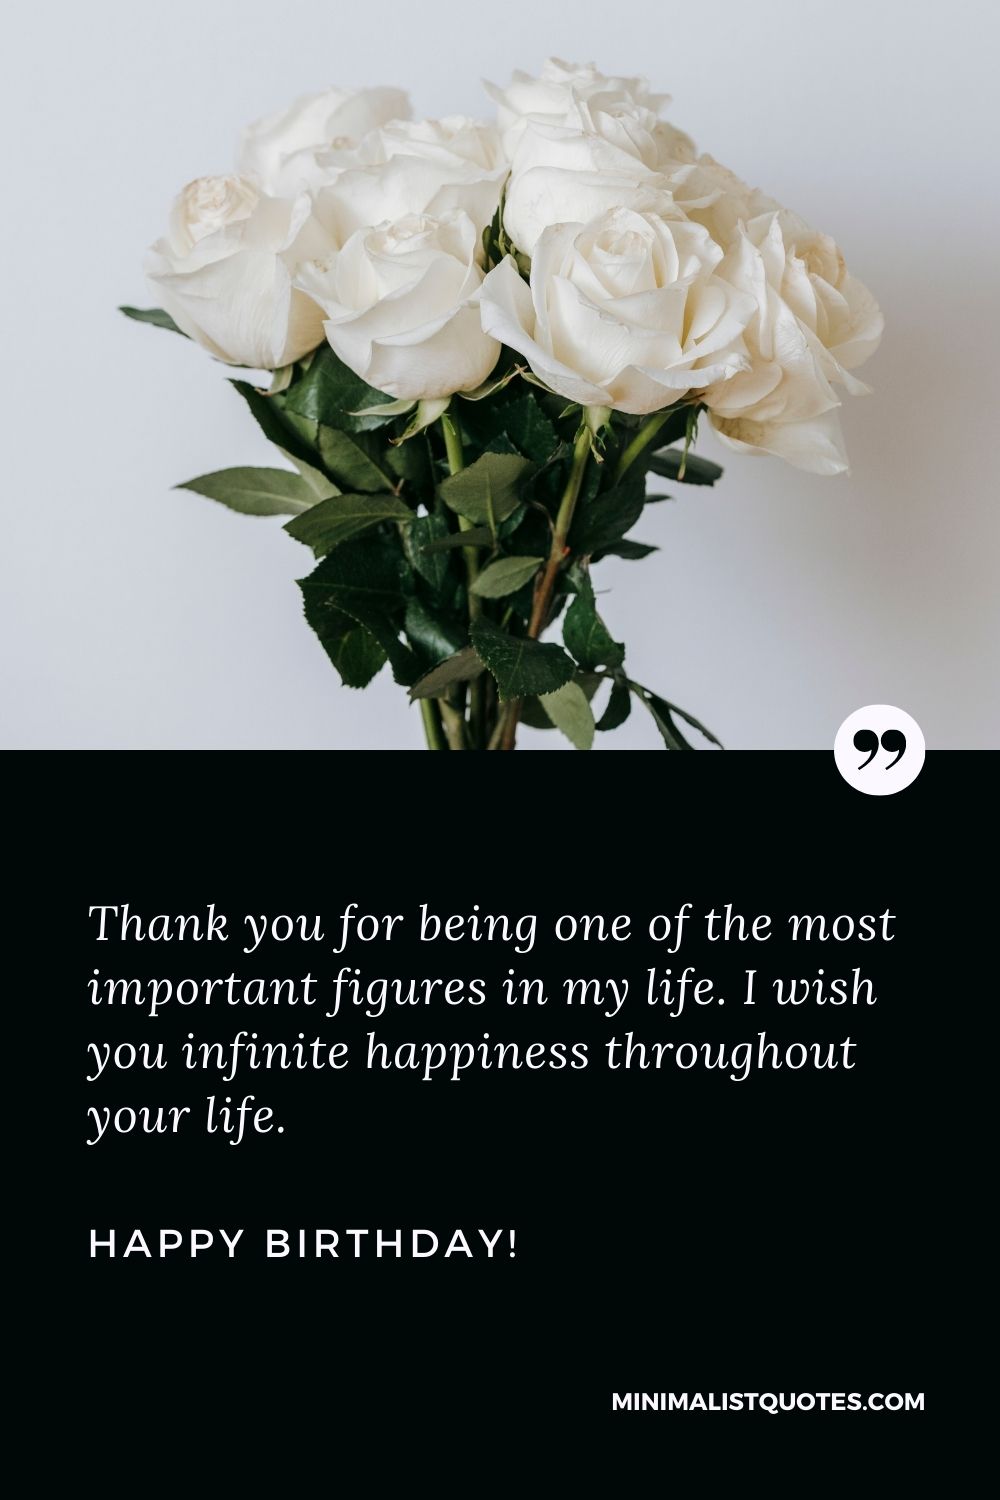 105 Short & Simple Birthday Wishes for the Minimalist in You - YourFates   Simple happy birthday wishes, Simple birthday message, Birthday wishes for  lover